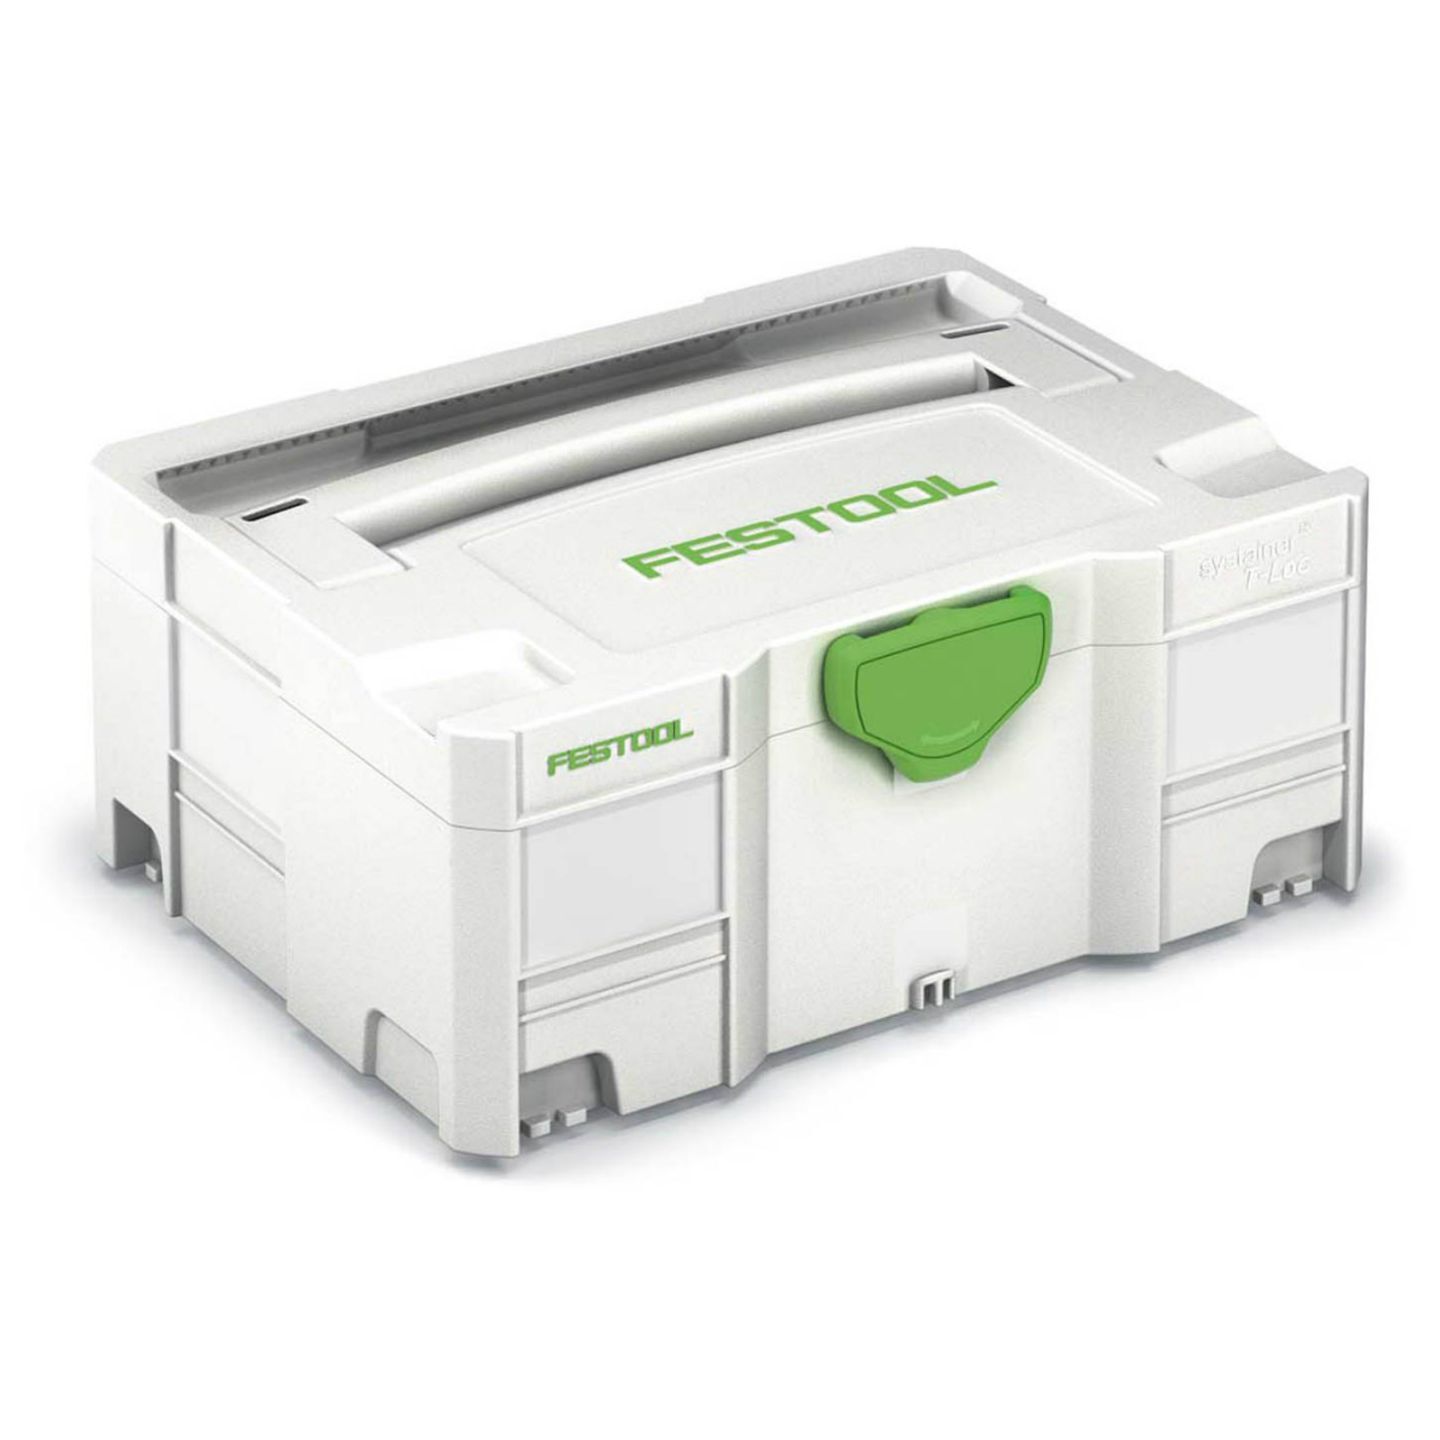 Festool Systainer SYS 2 T-Loc Storage Box (497564)